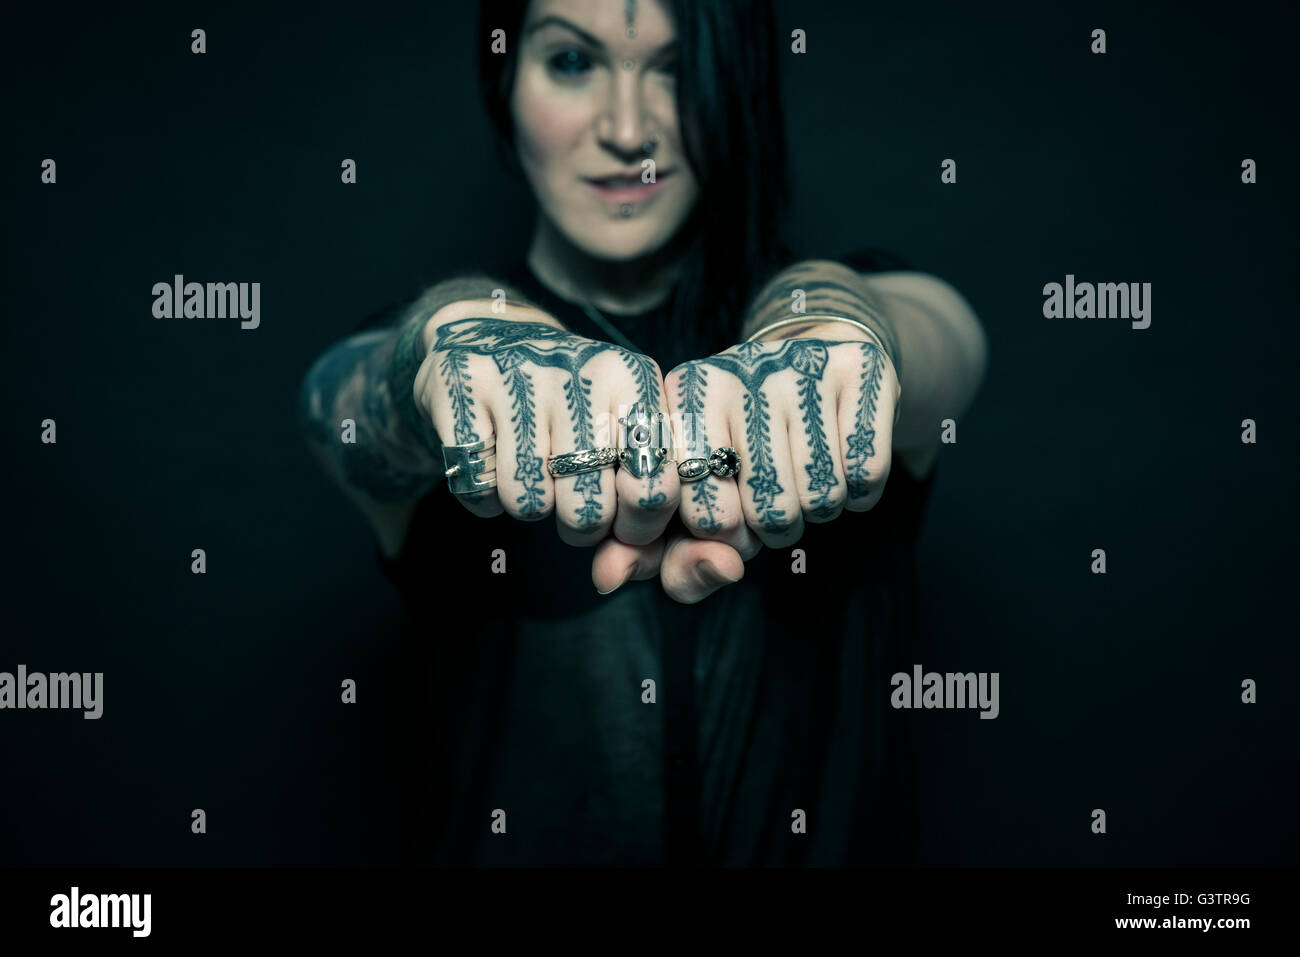 Studio portrait of a young woman with tattooed arms and face. Stock Photo